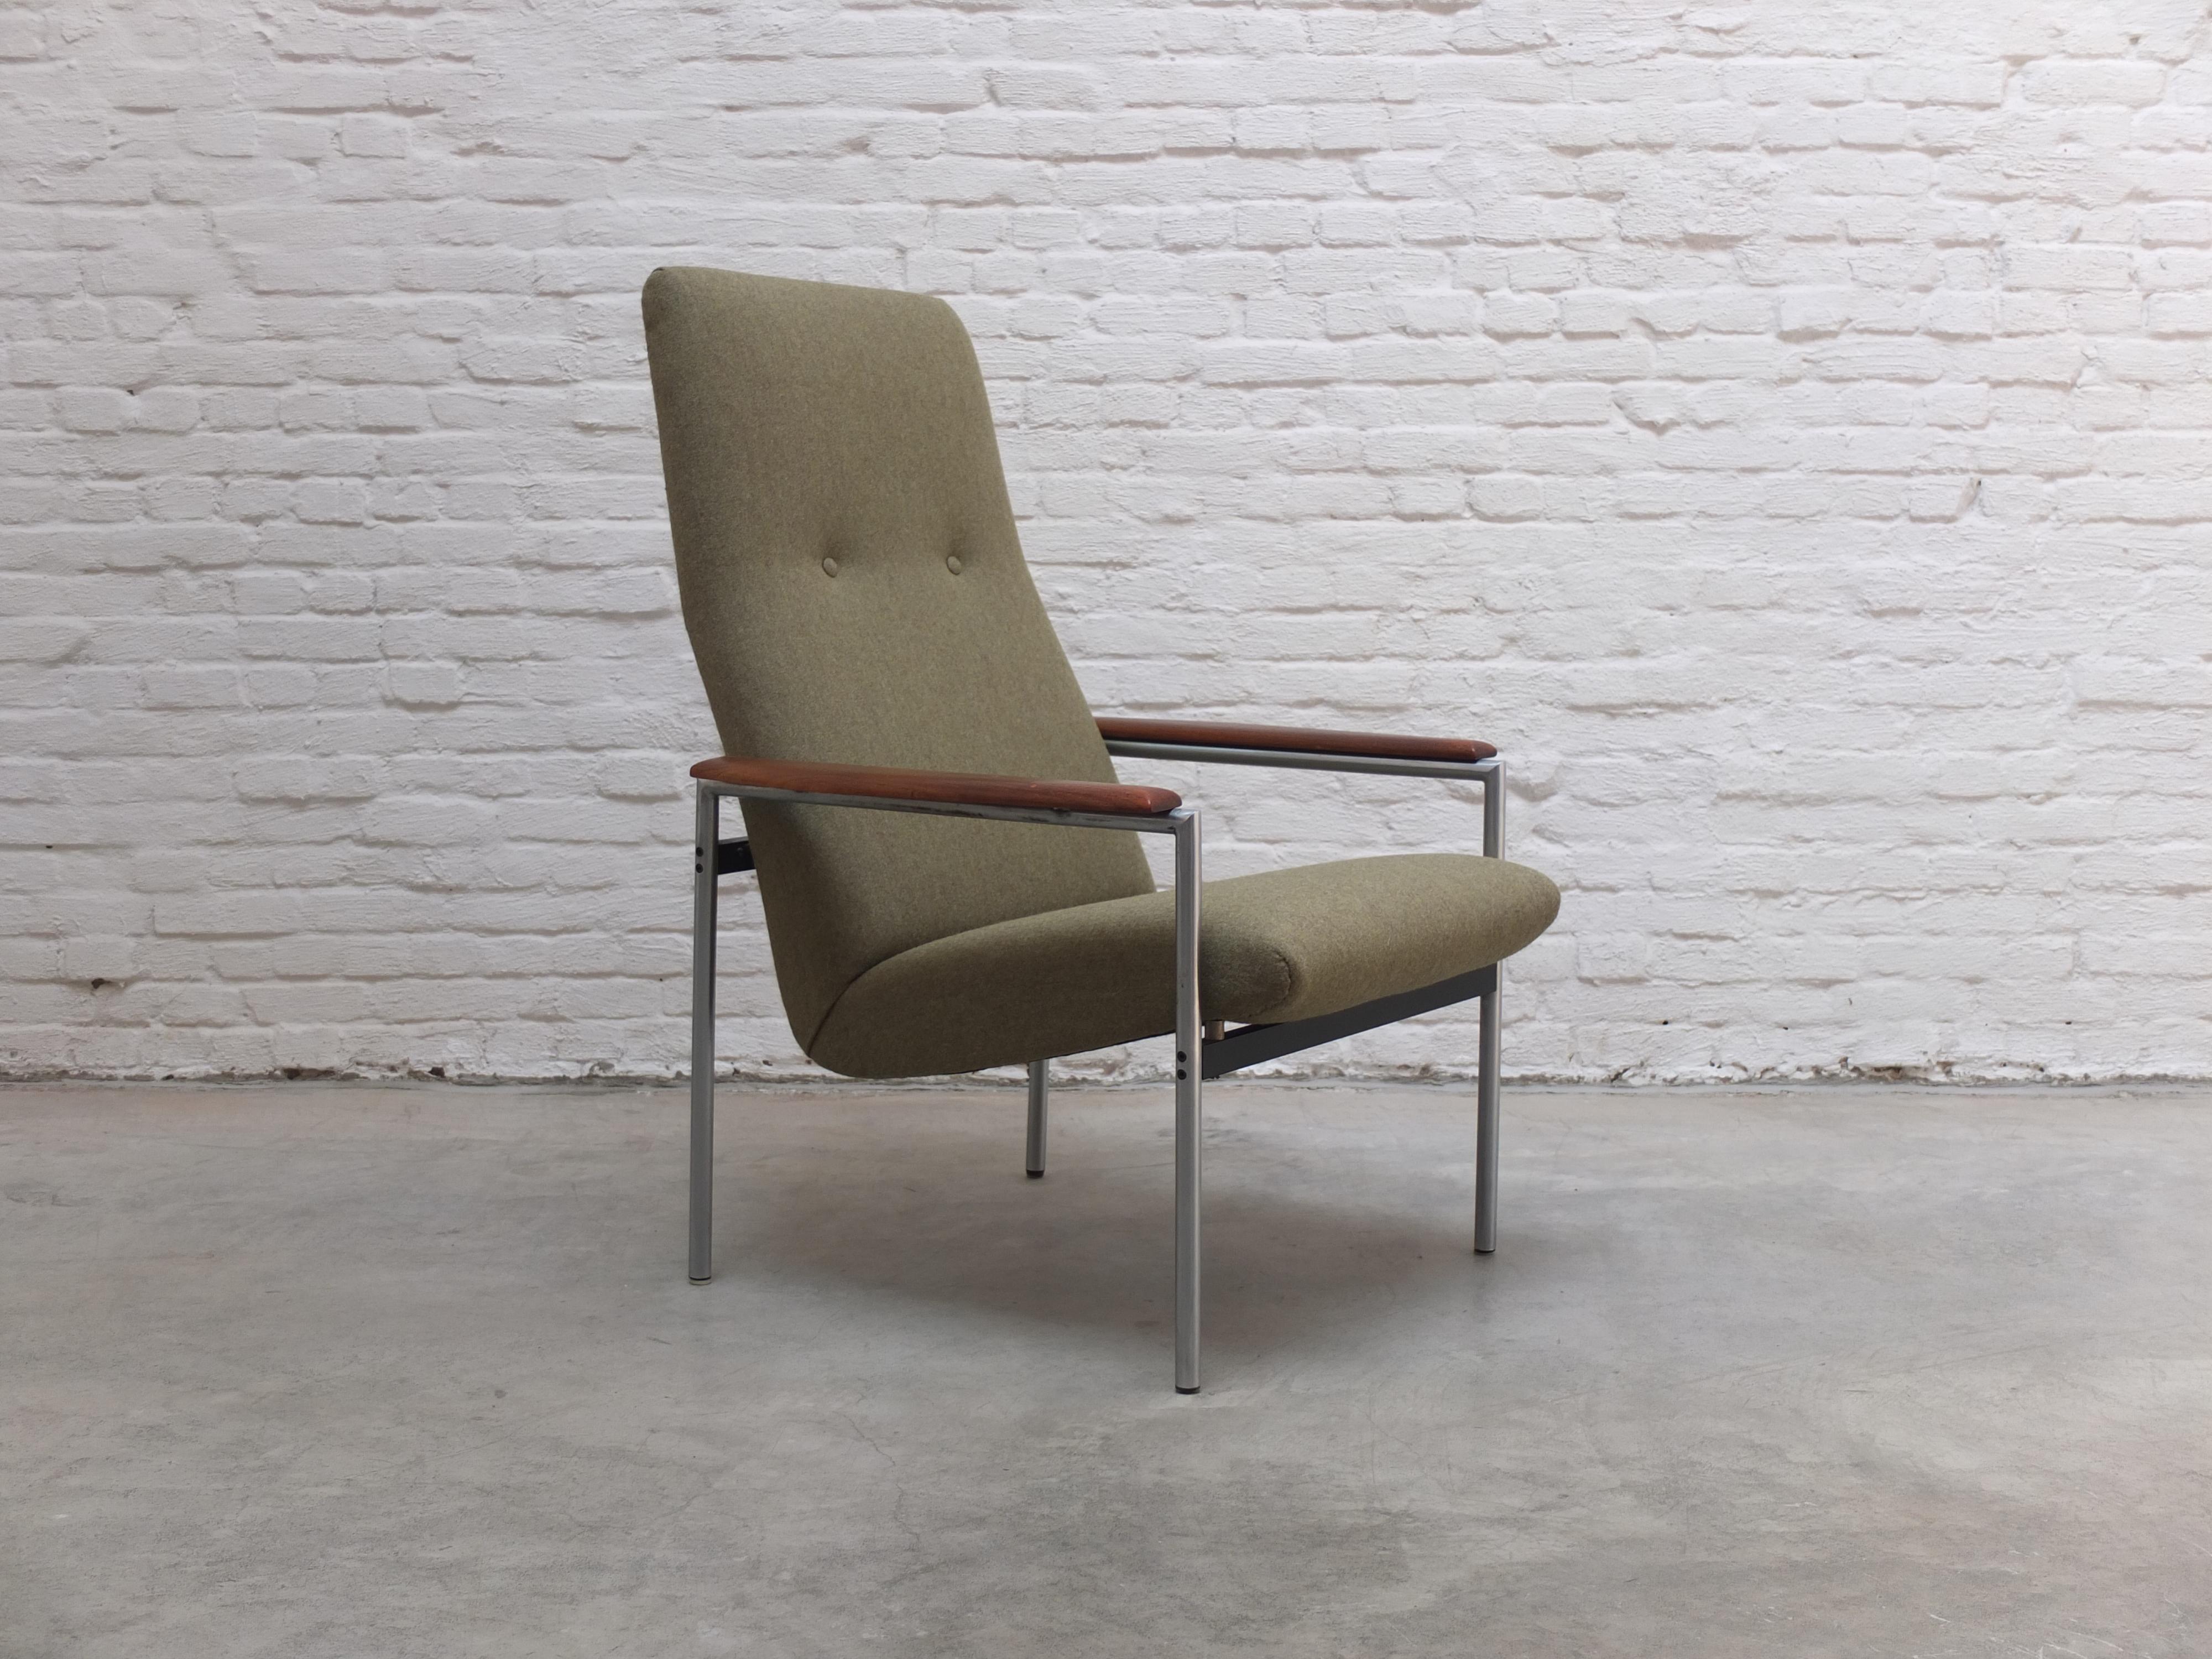 Modernist lounge chair produced in Holland during the 1960s. The design could be Martin Visser for ‘t Spectrum or even Rob Parry for Gelderland. It actually looks like a combination of the two. Either way a very nice timeless design thanks to the